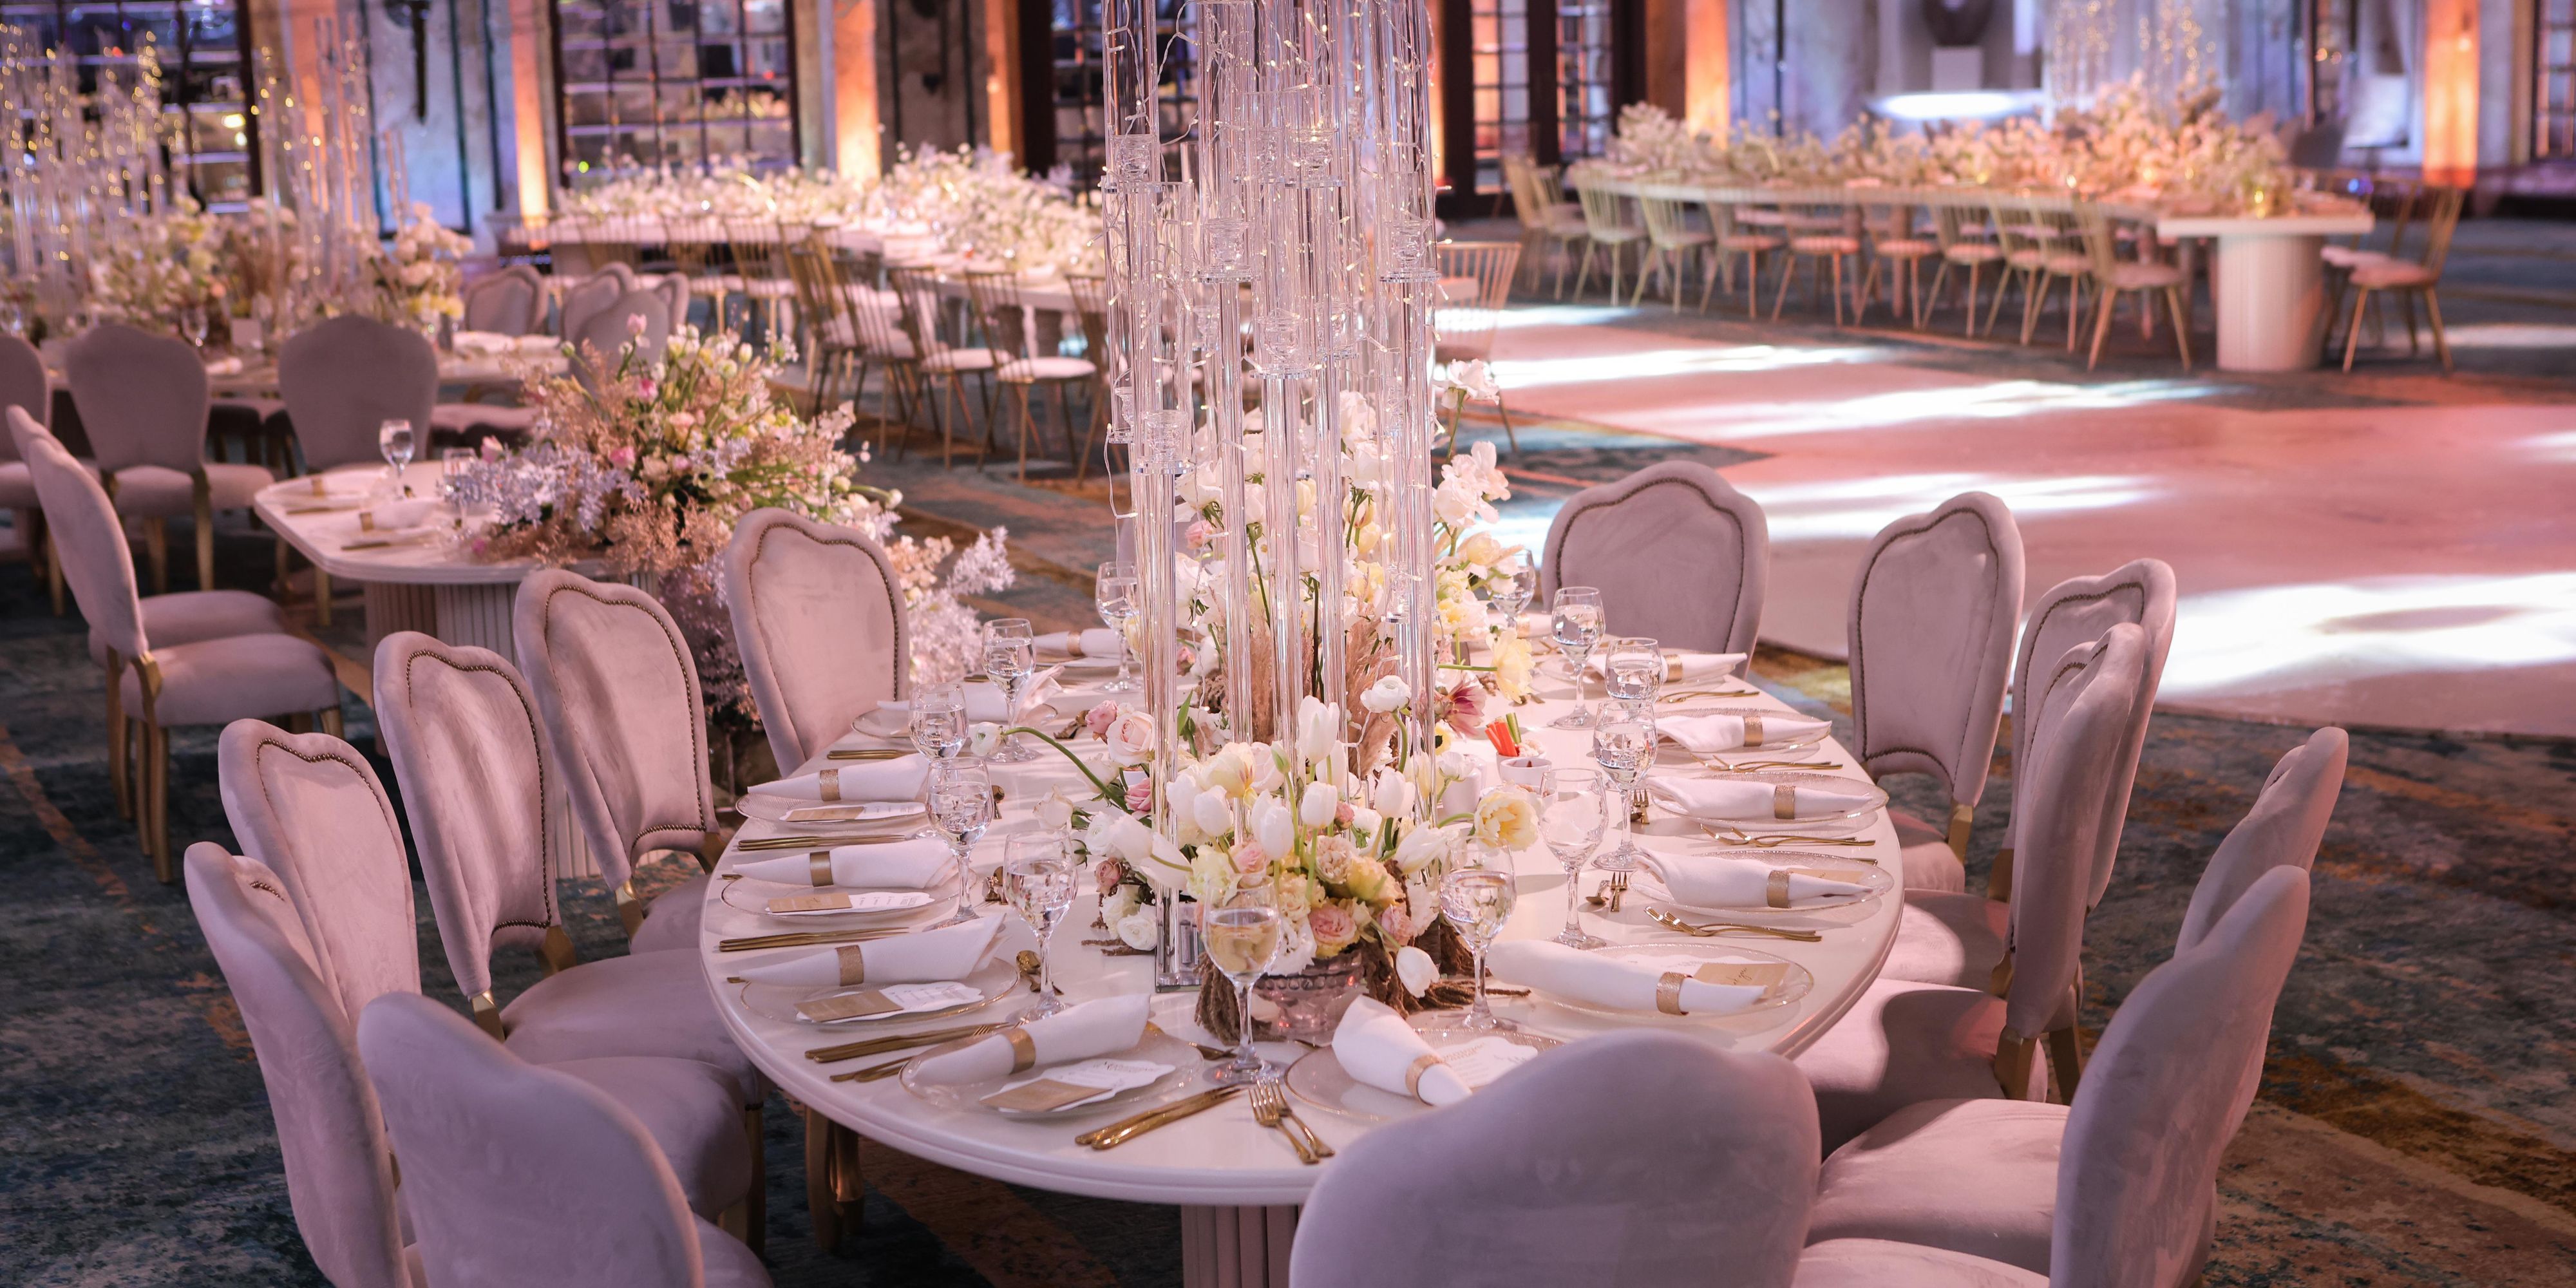 Our Grand Ballroom and choice of beautiful event spaces provide the perfect setting for unforgettable celebrations, while our expert staff ensure every detail is taken care of. With elegant accommodations and delicious catering, let us make your wedding dreams a reality.